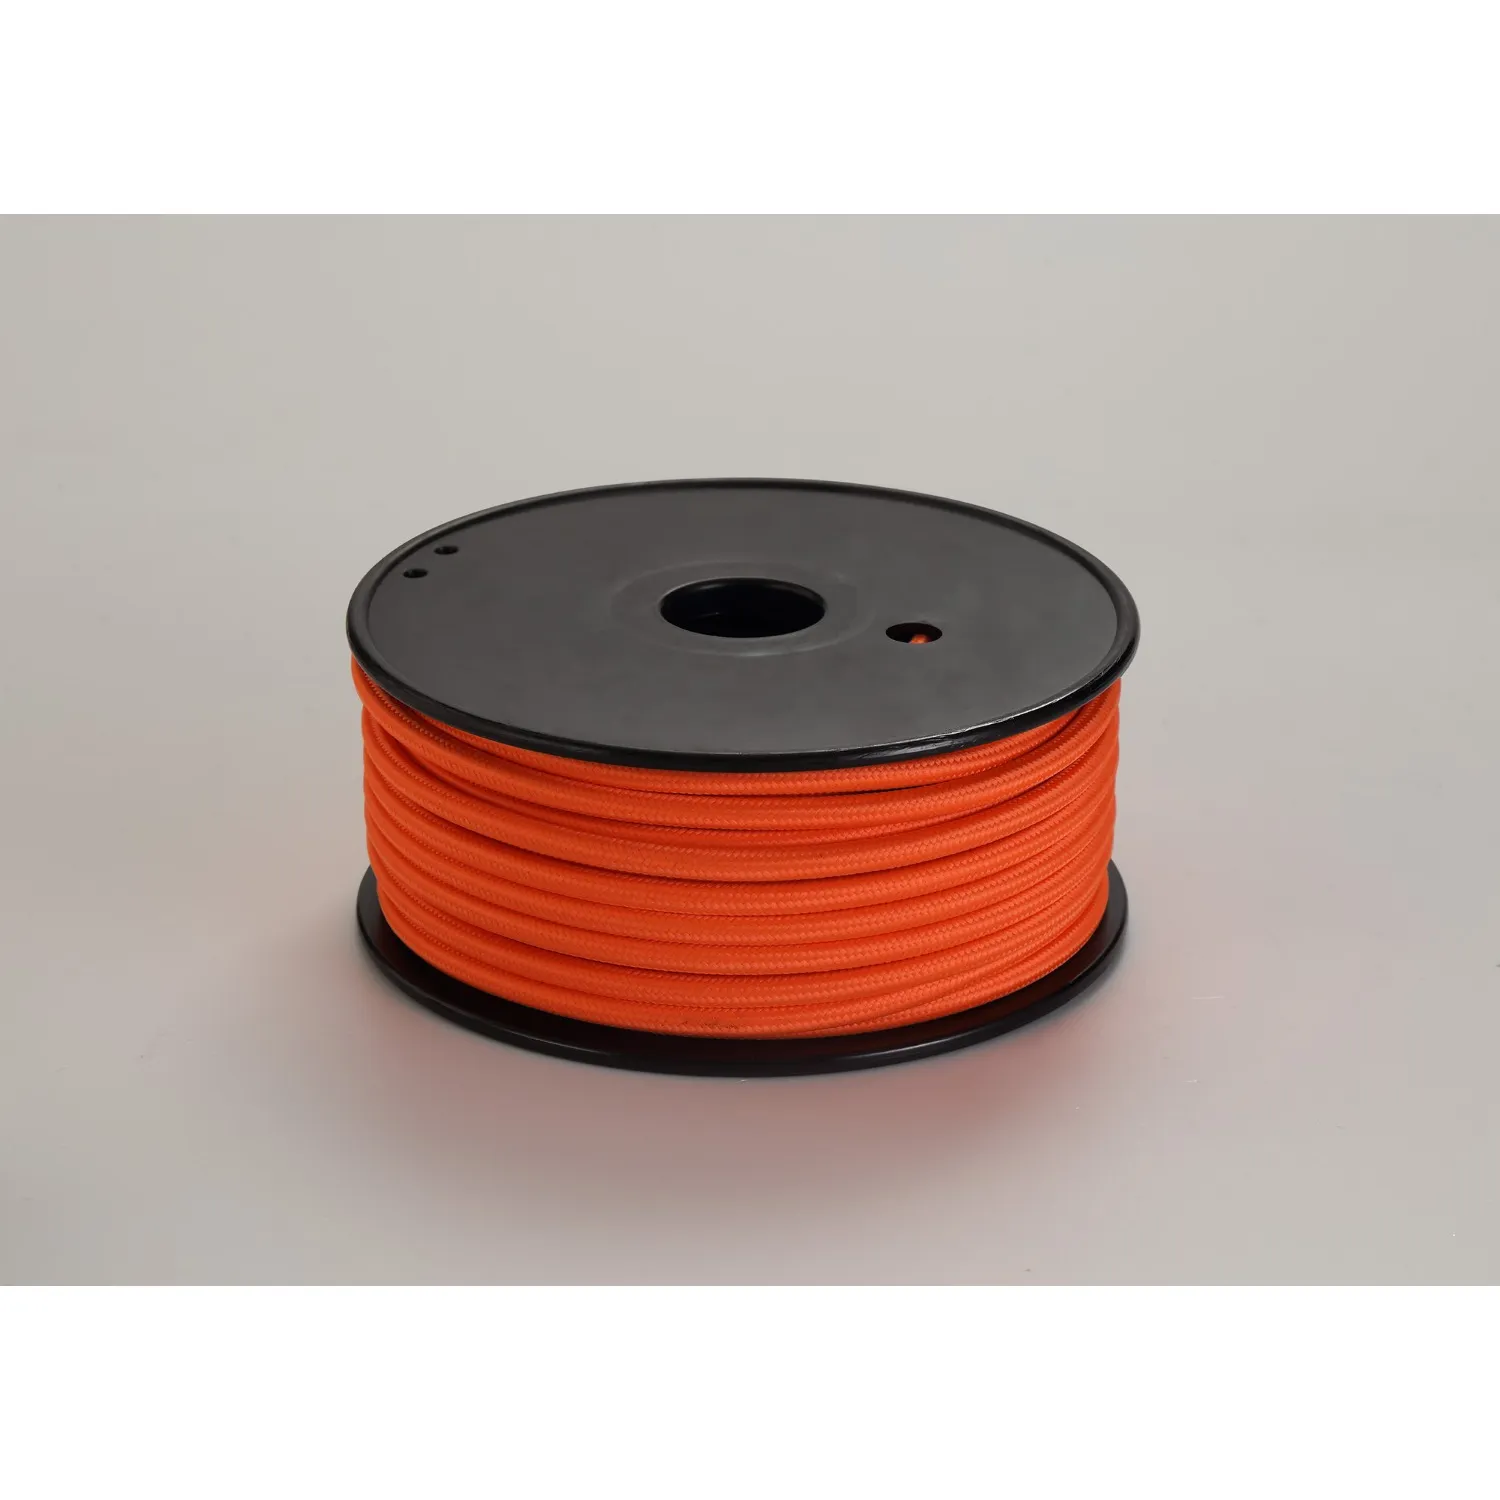 Knightsbridge 25m Roll Orange Braided 2 Core 0.75mm Cable VDE Approved